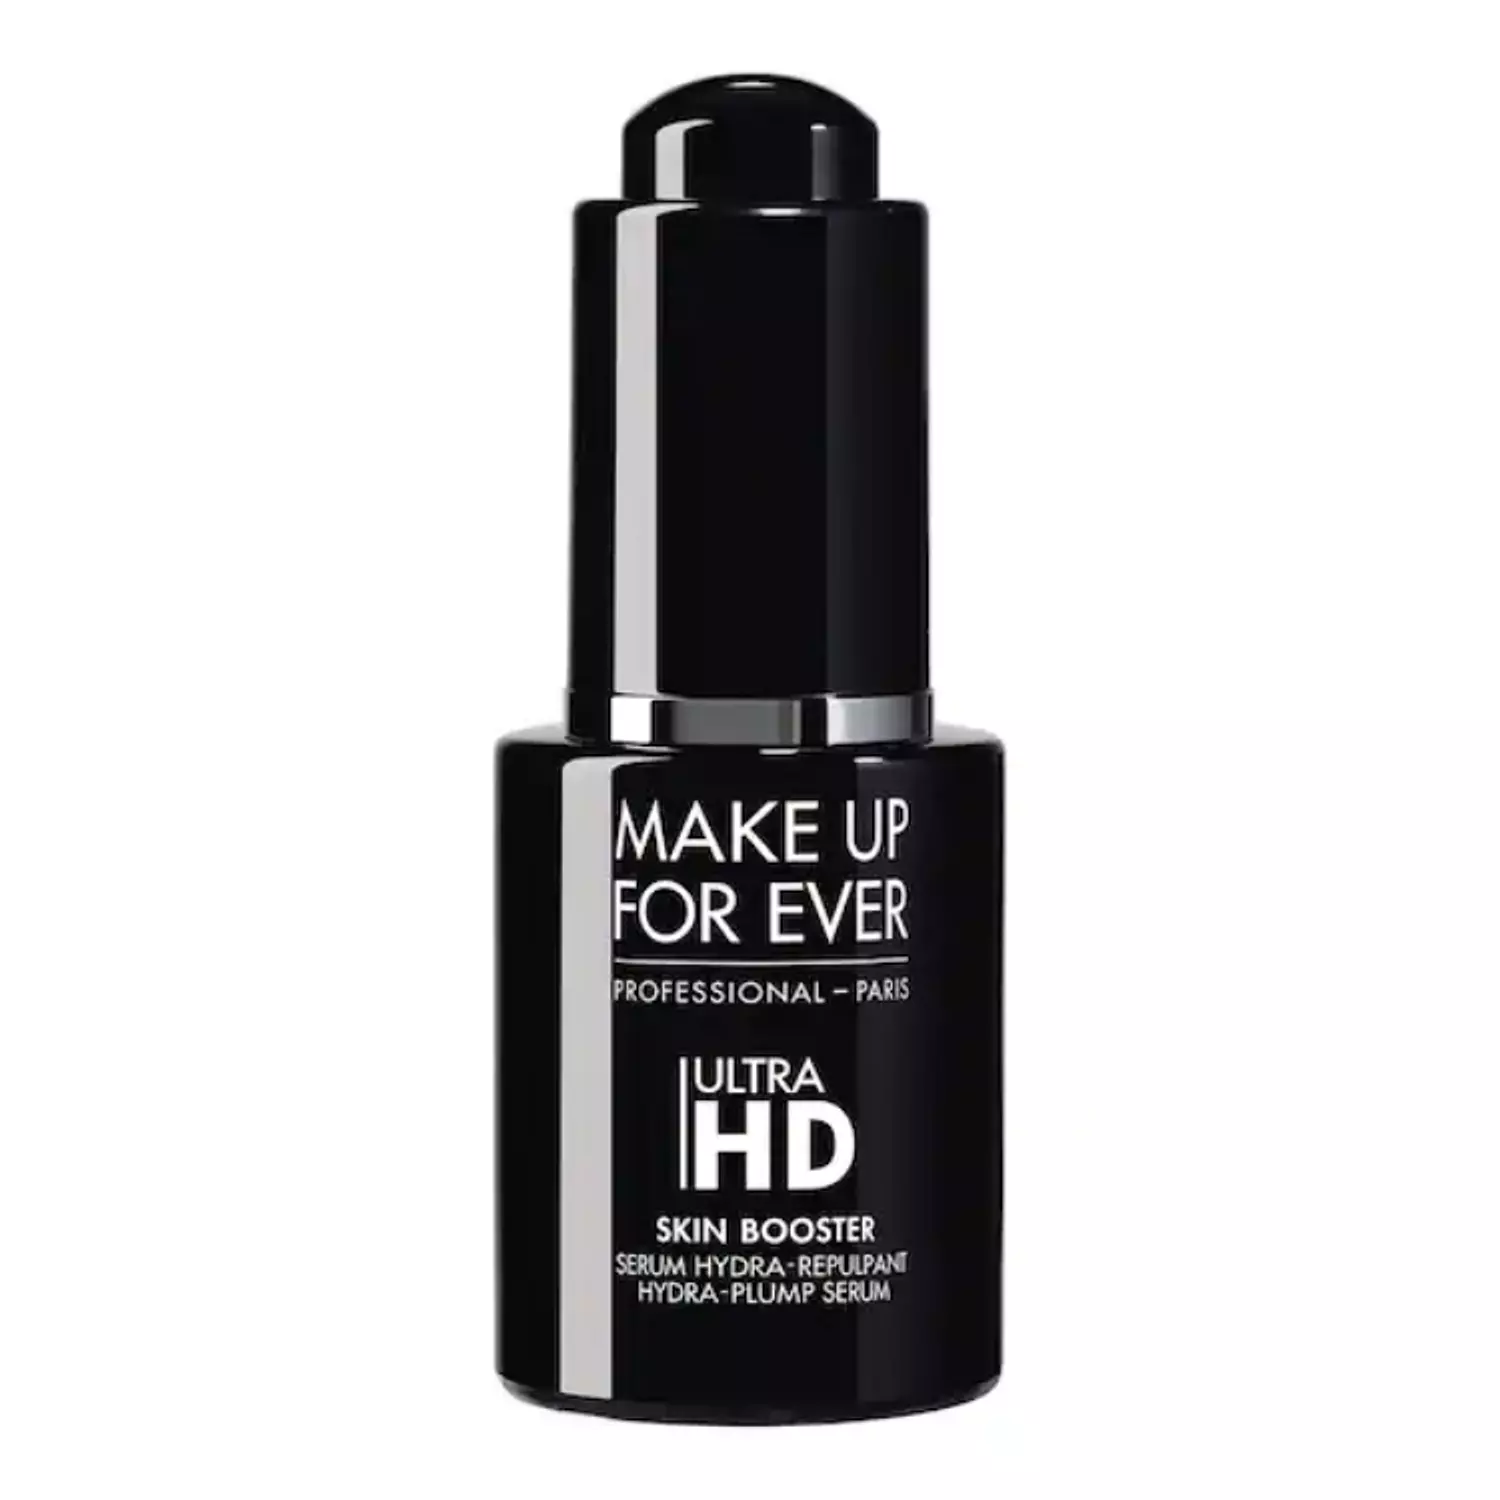 ULTRA HD SKIN BOOSTER | MAKE UP FOREVR-2nd-img